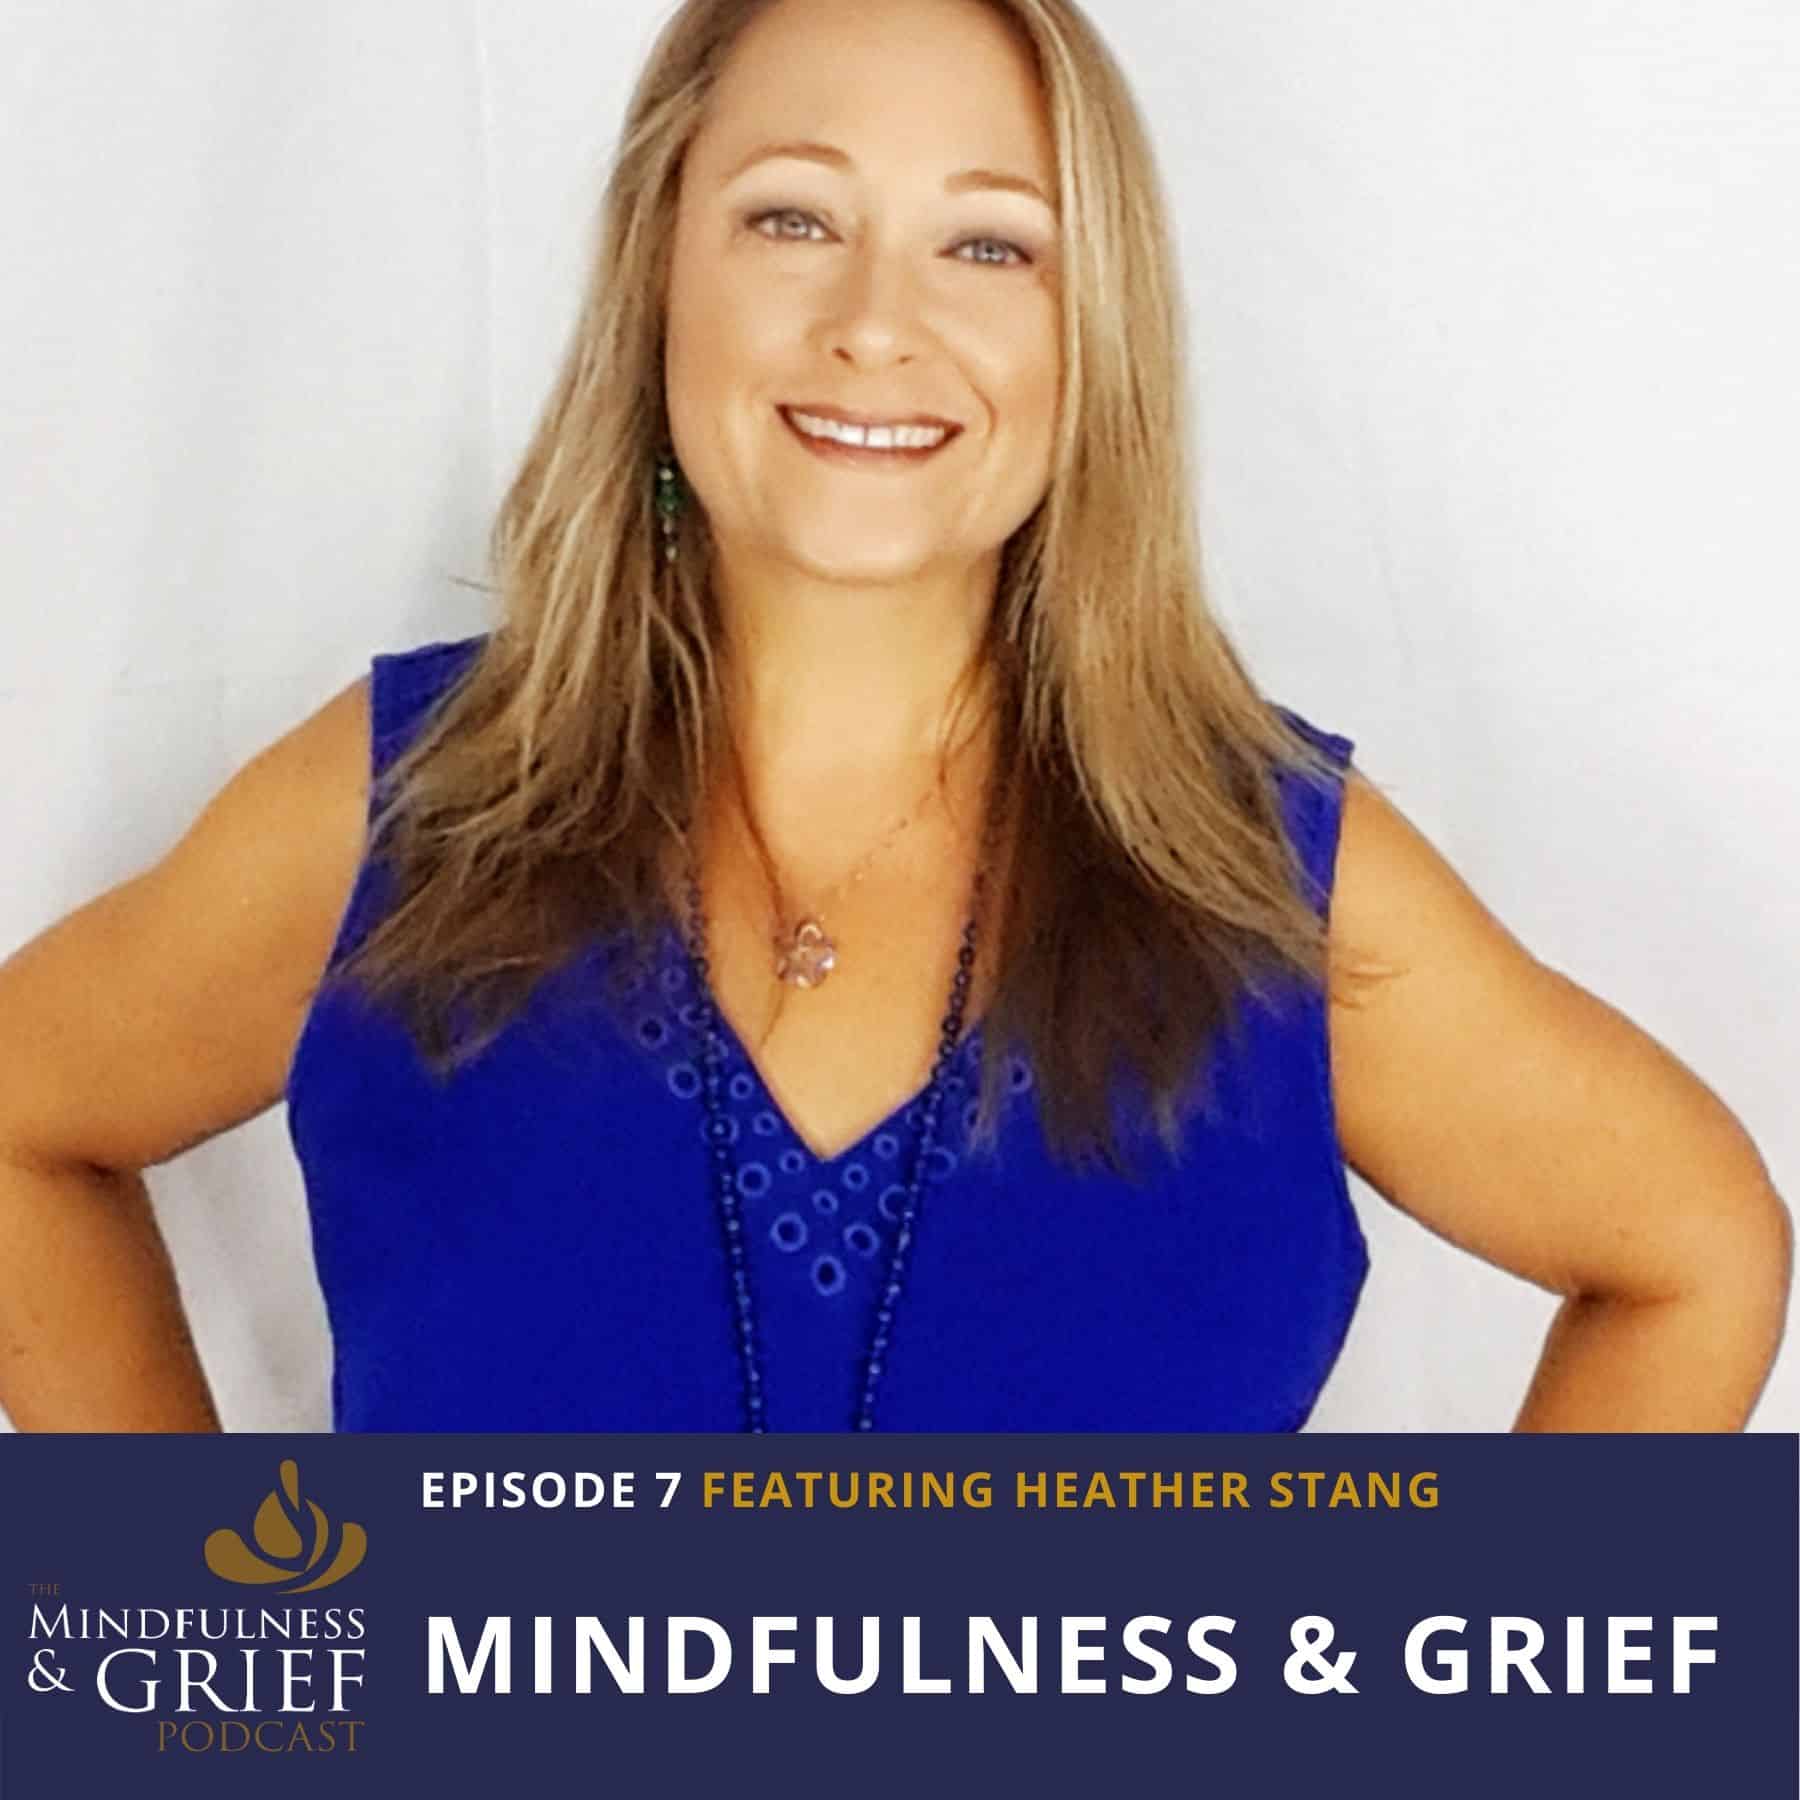 Mindfulness & Grief_ From Self-Care to Posttraumatic Growth with Heather Stang (1)